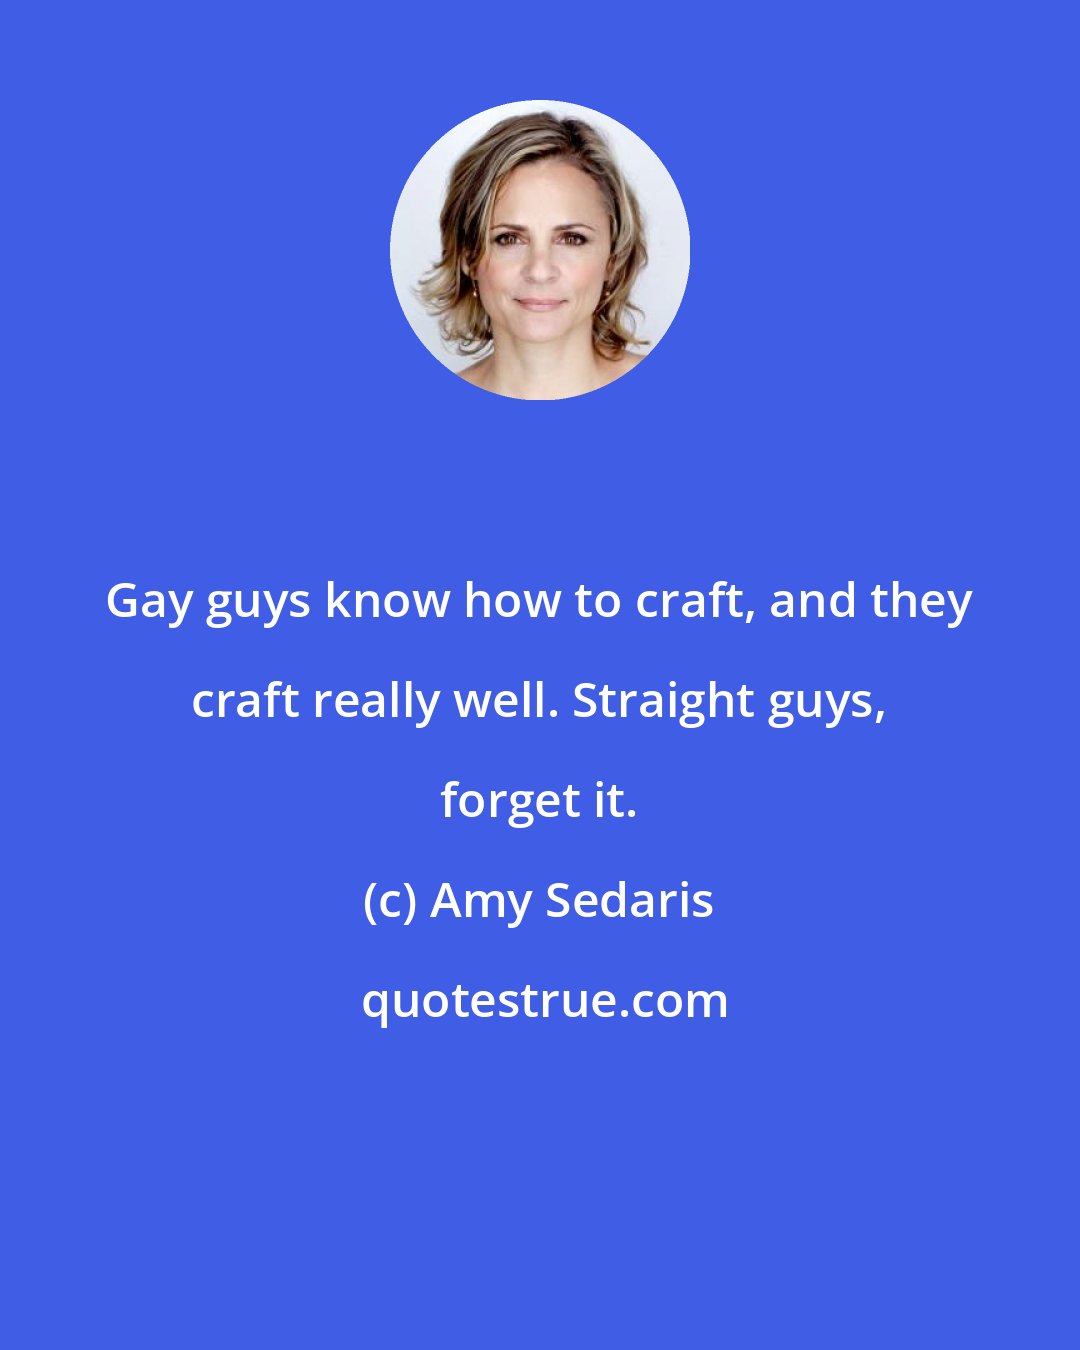 Amy Sedaris: Gay guys know how to craft, and they craft really well. Straight guys, forget it.